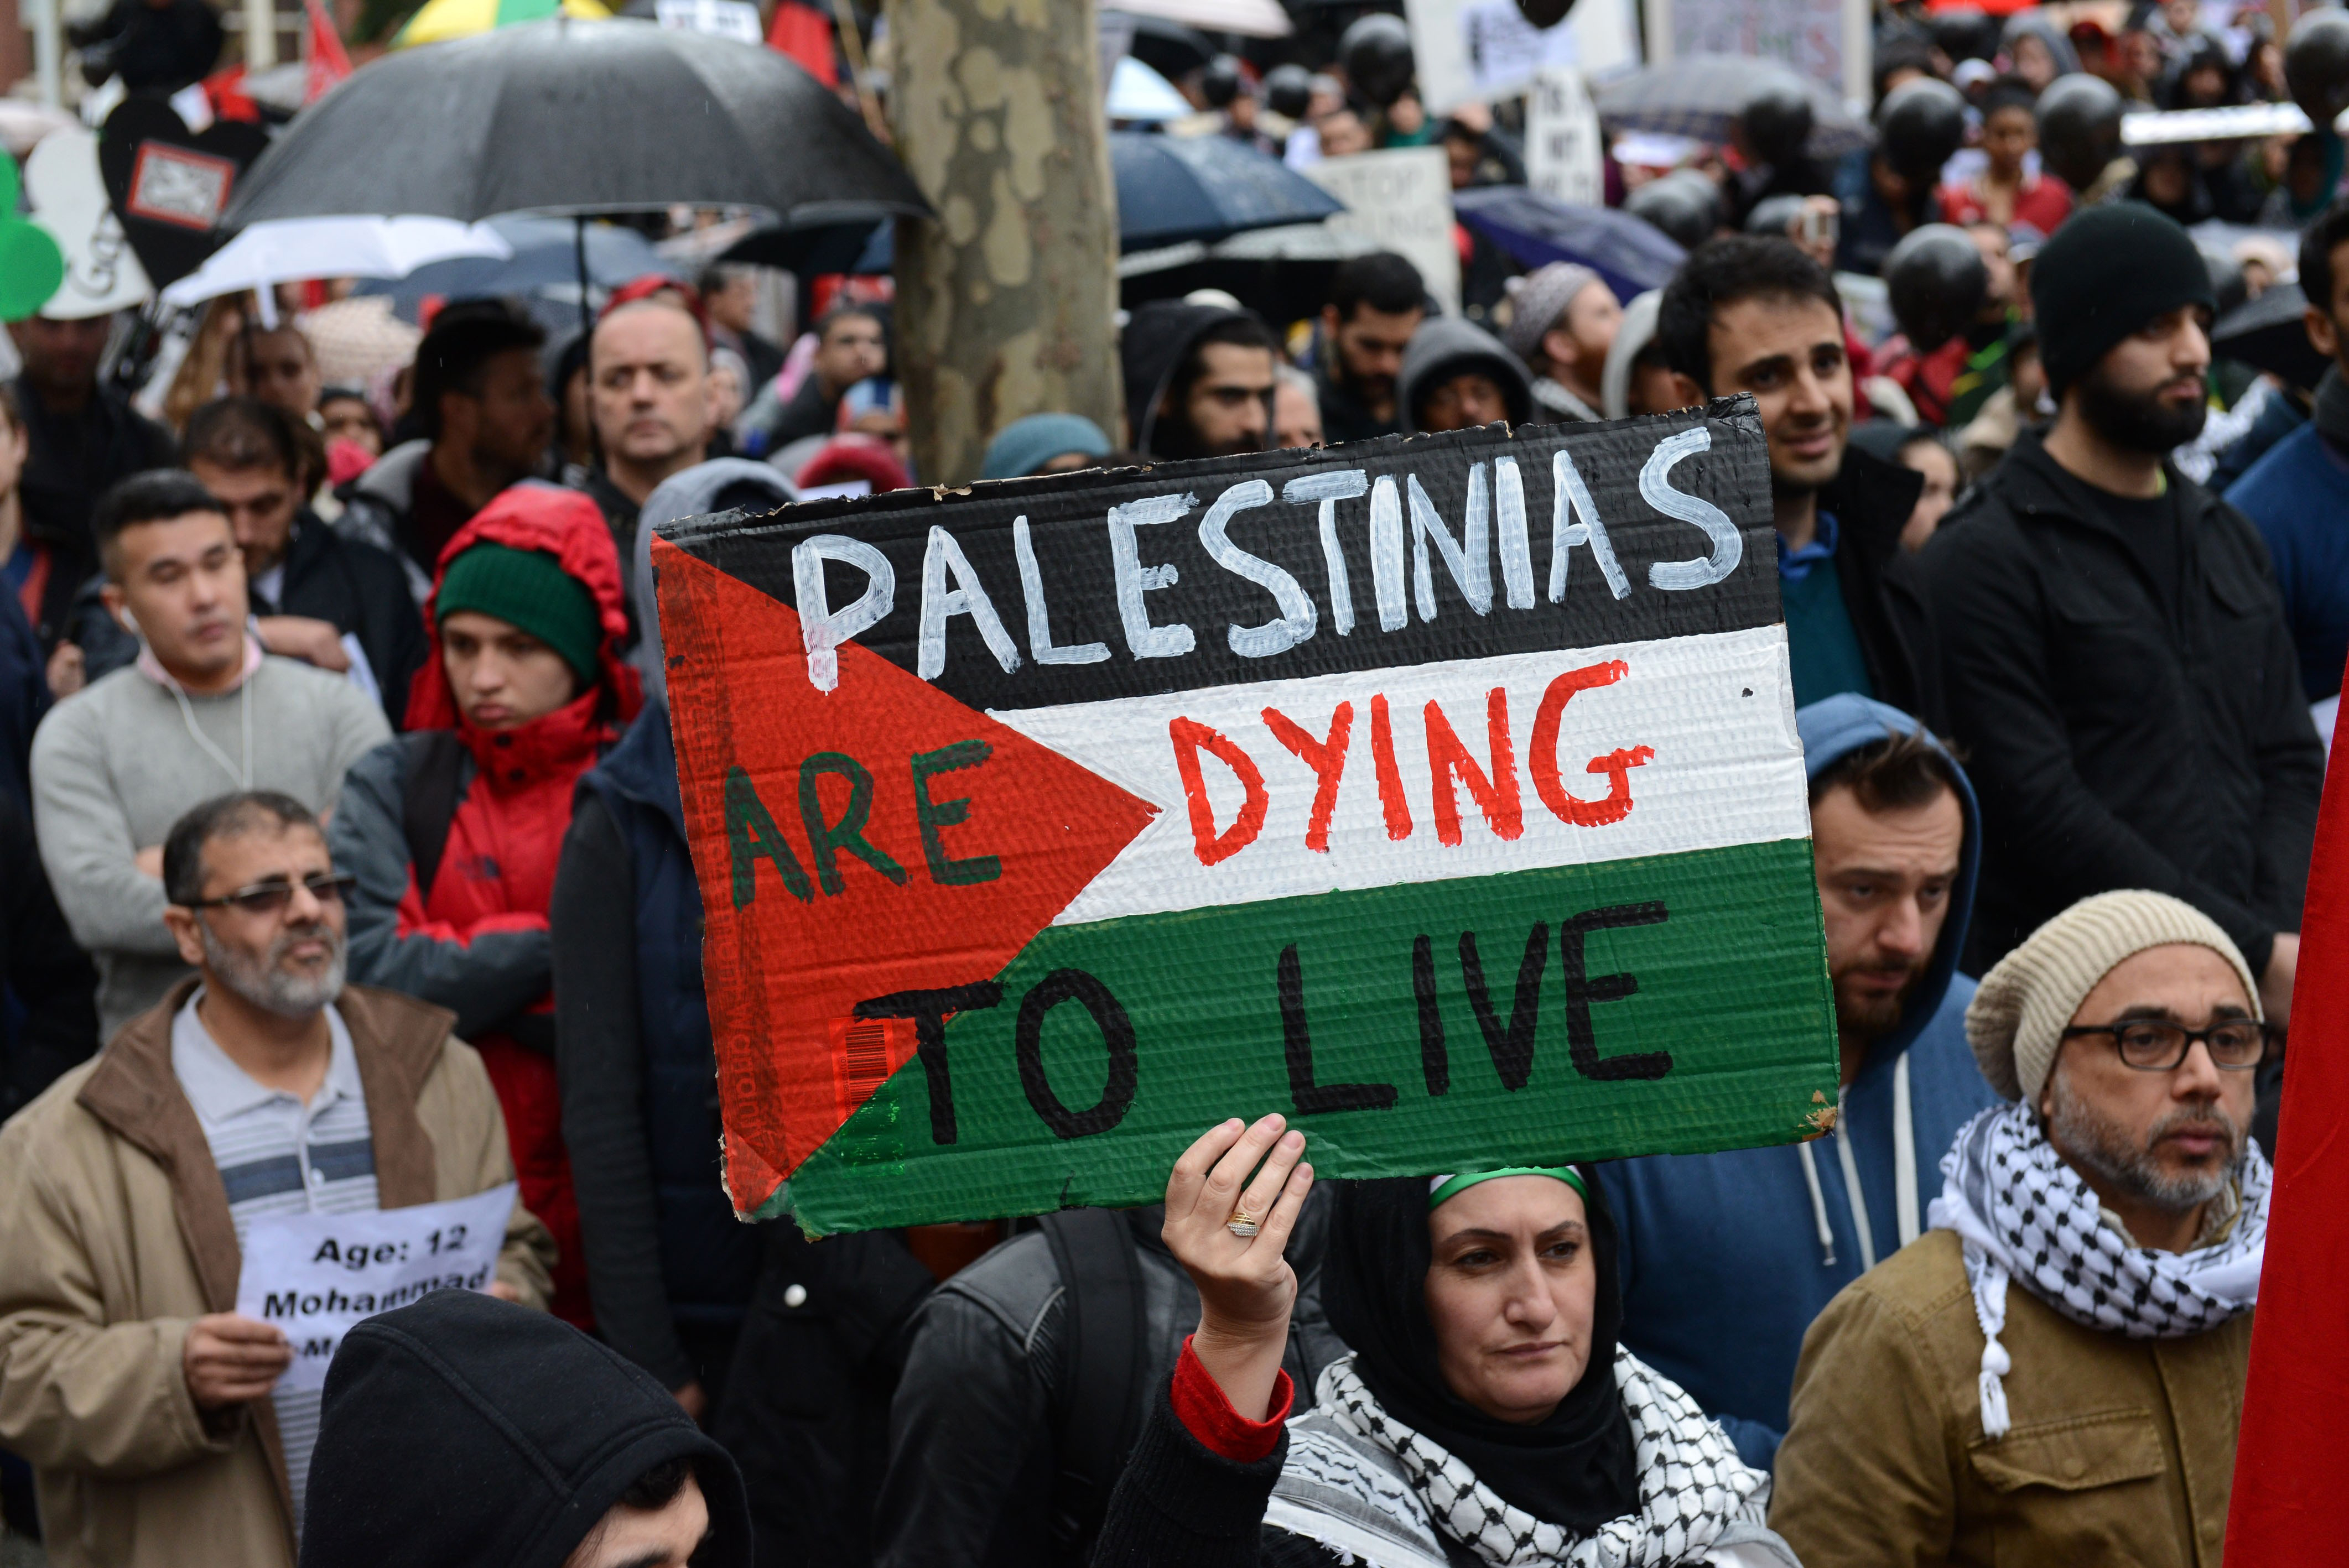 Thousands of people stage a demonstration to protest the Israeli ongoing attacks in Gaza on July 26, 2014, in Melbourne, Australia. (Recep Sakar—Anadolu Agency/Getty Images)